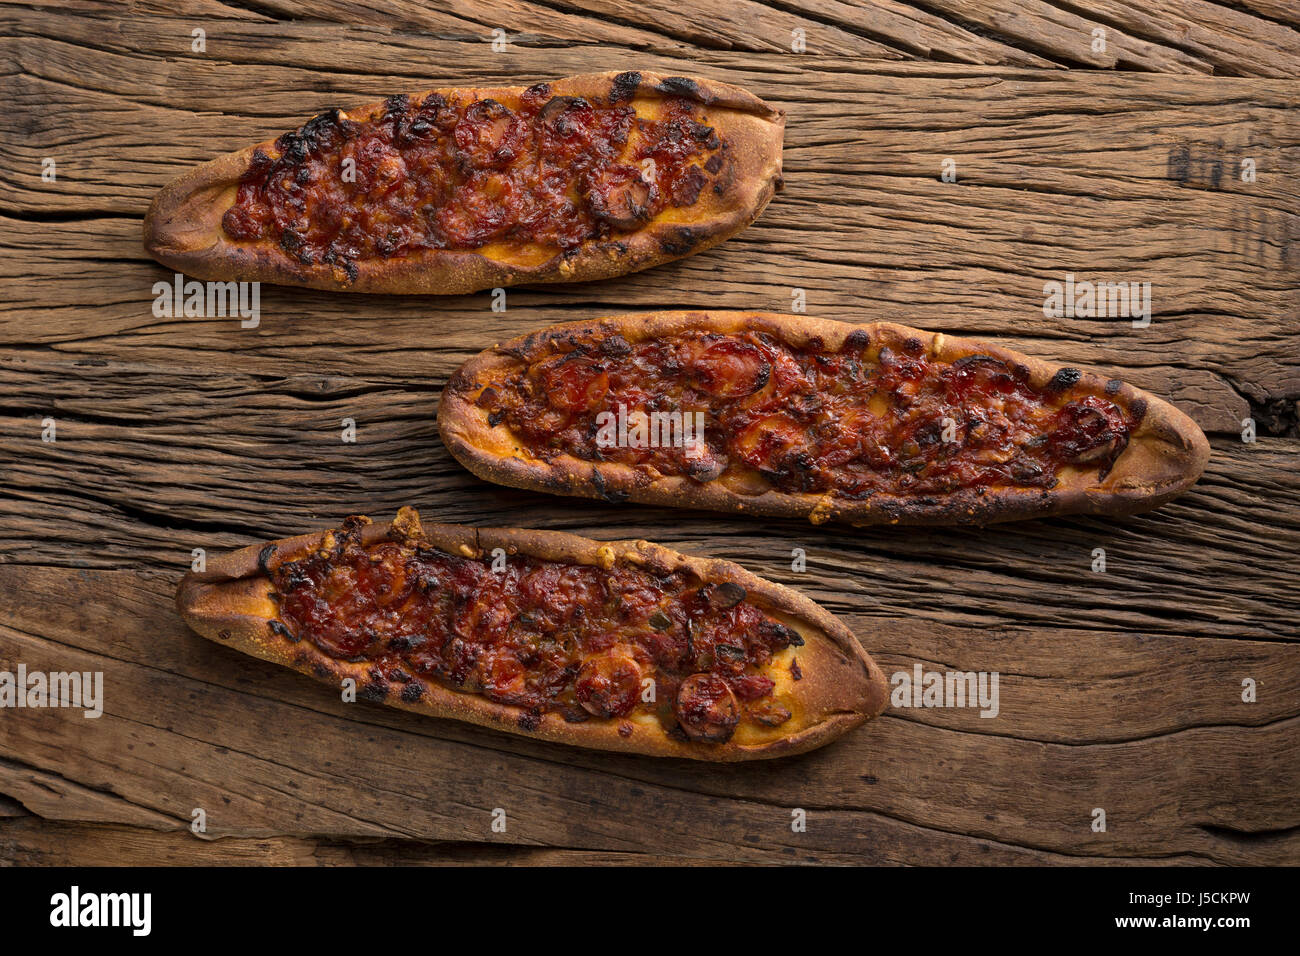 Turkish pide pizza sitting on a rustic wooden table. Stock Photo